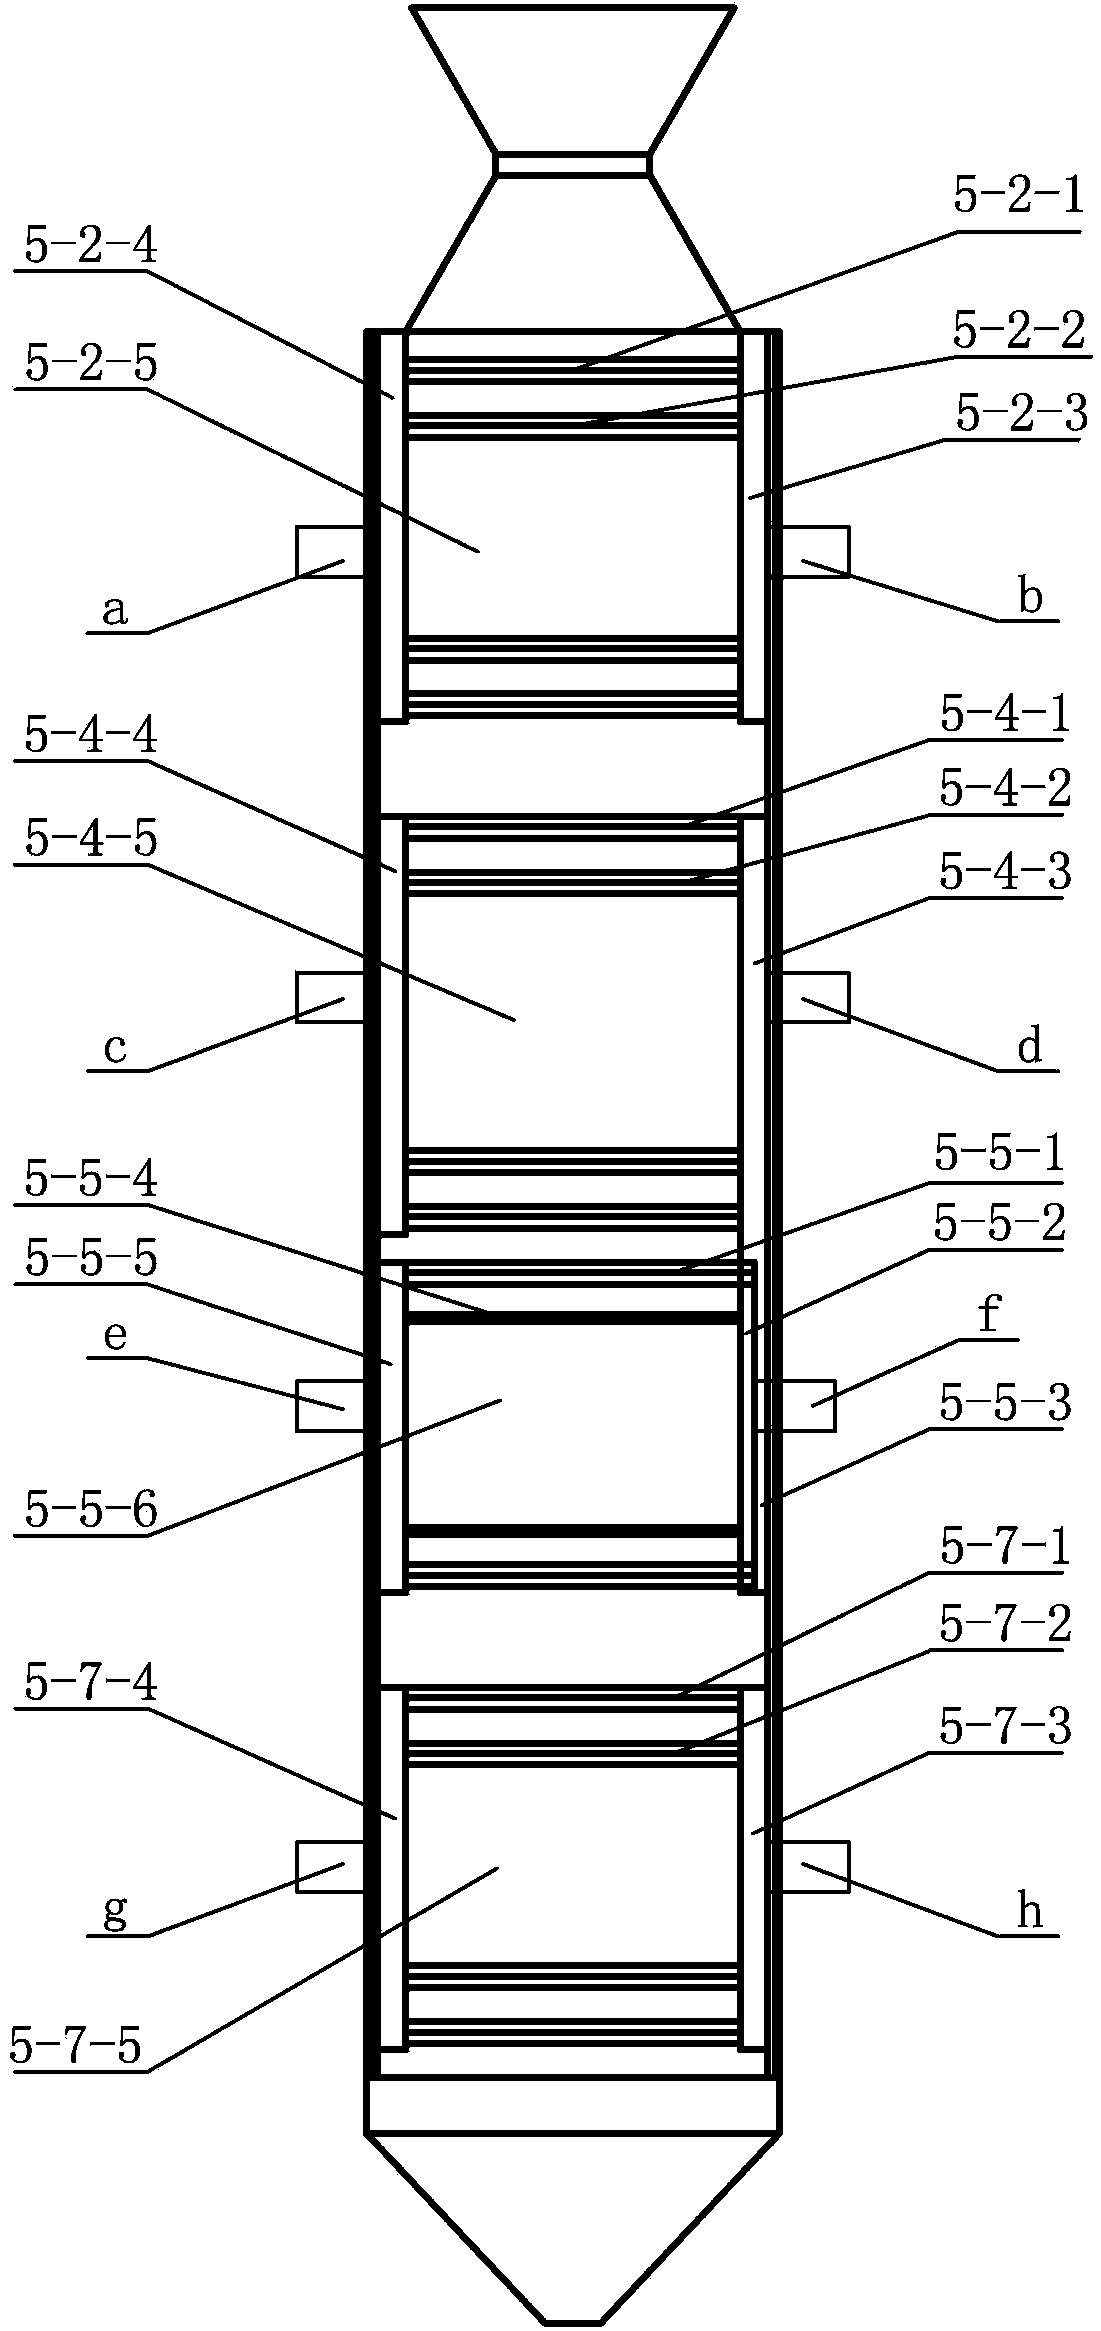 Device and method for pyrolyzing pea coal by utilizing internally heated vertical furnace